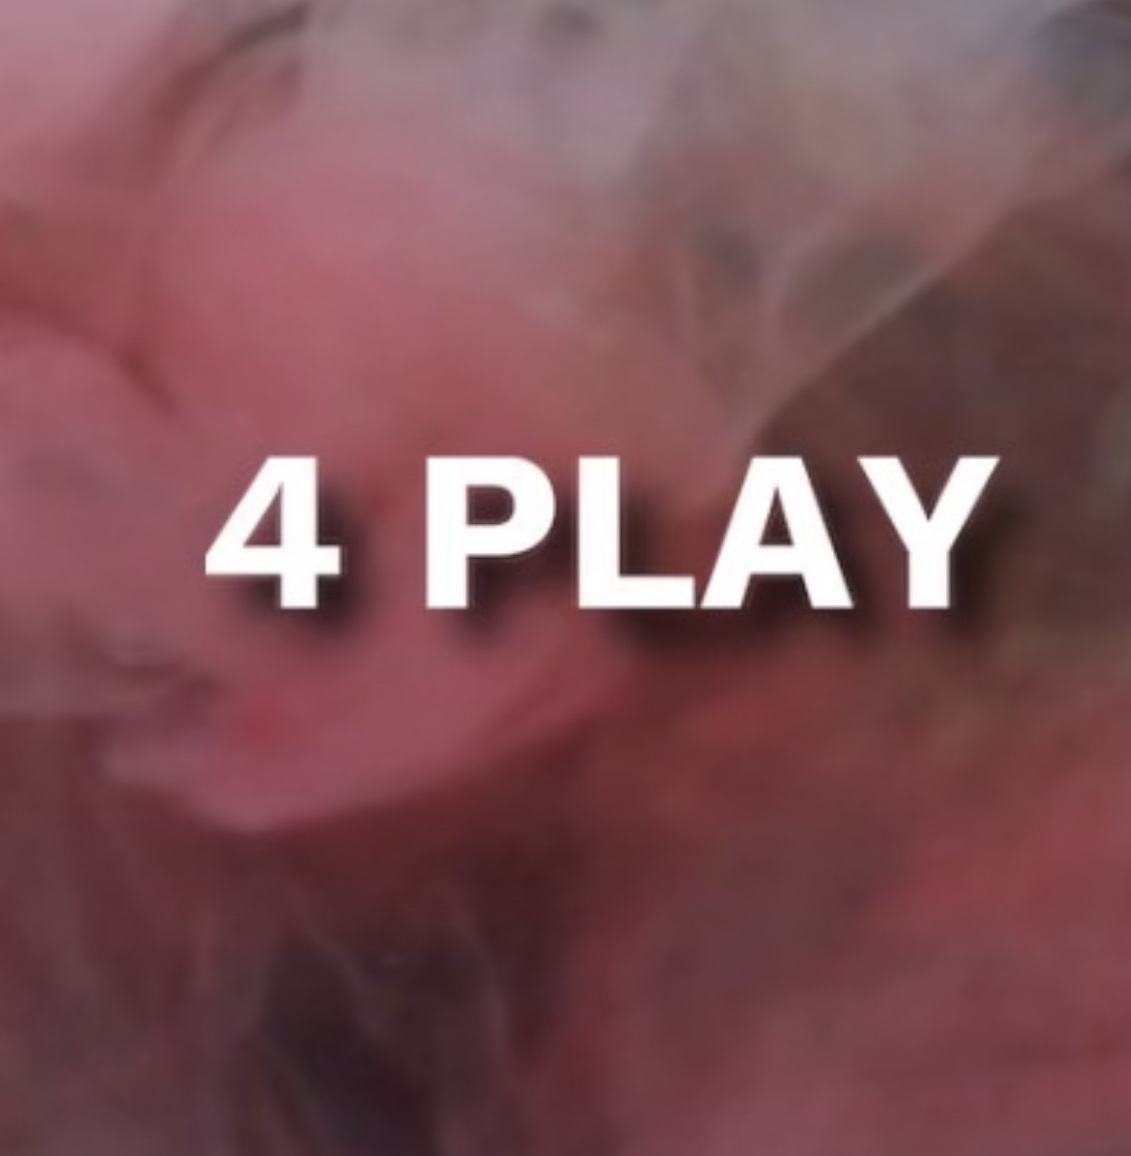 4 PLAY is a treat in its self! One of our Top sellers at Fantasia!

#hookah #topflavor #4play #smoking #fantasia